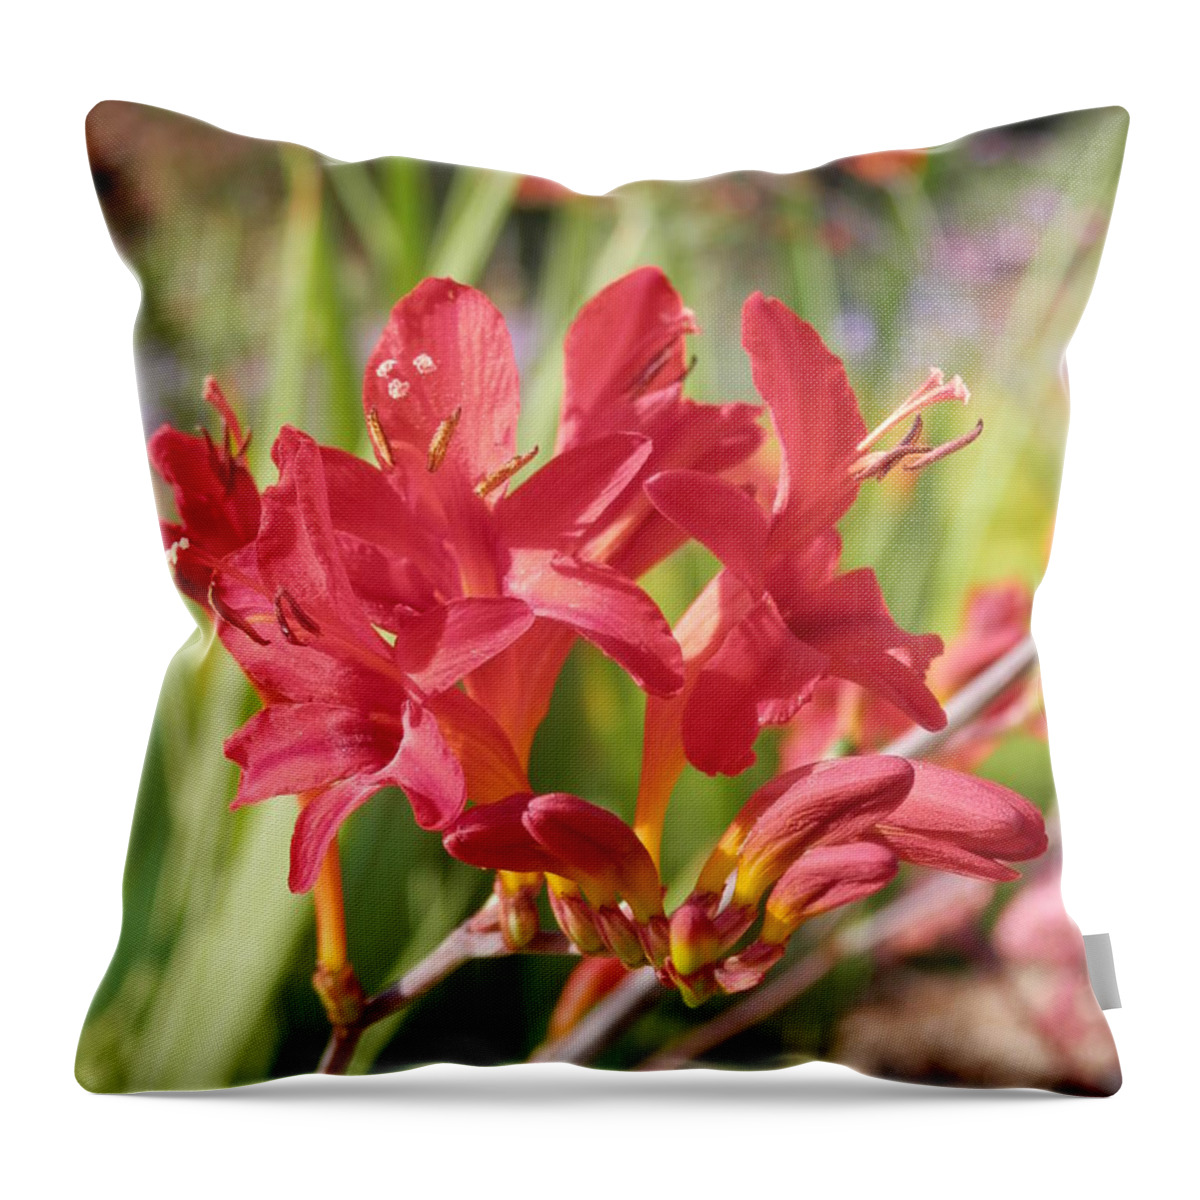 Red Flower Throw Pillow featuring the photograph Scarlet Beauty 1 by Pema Hou